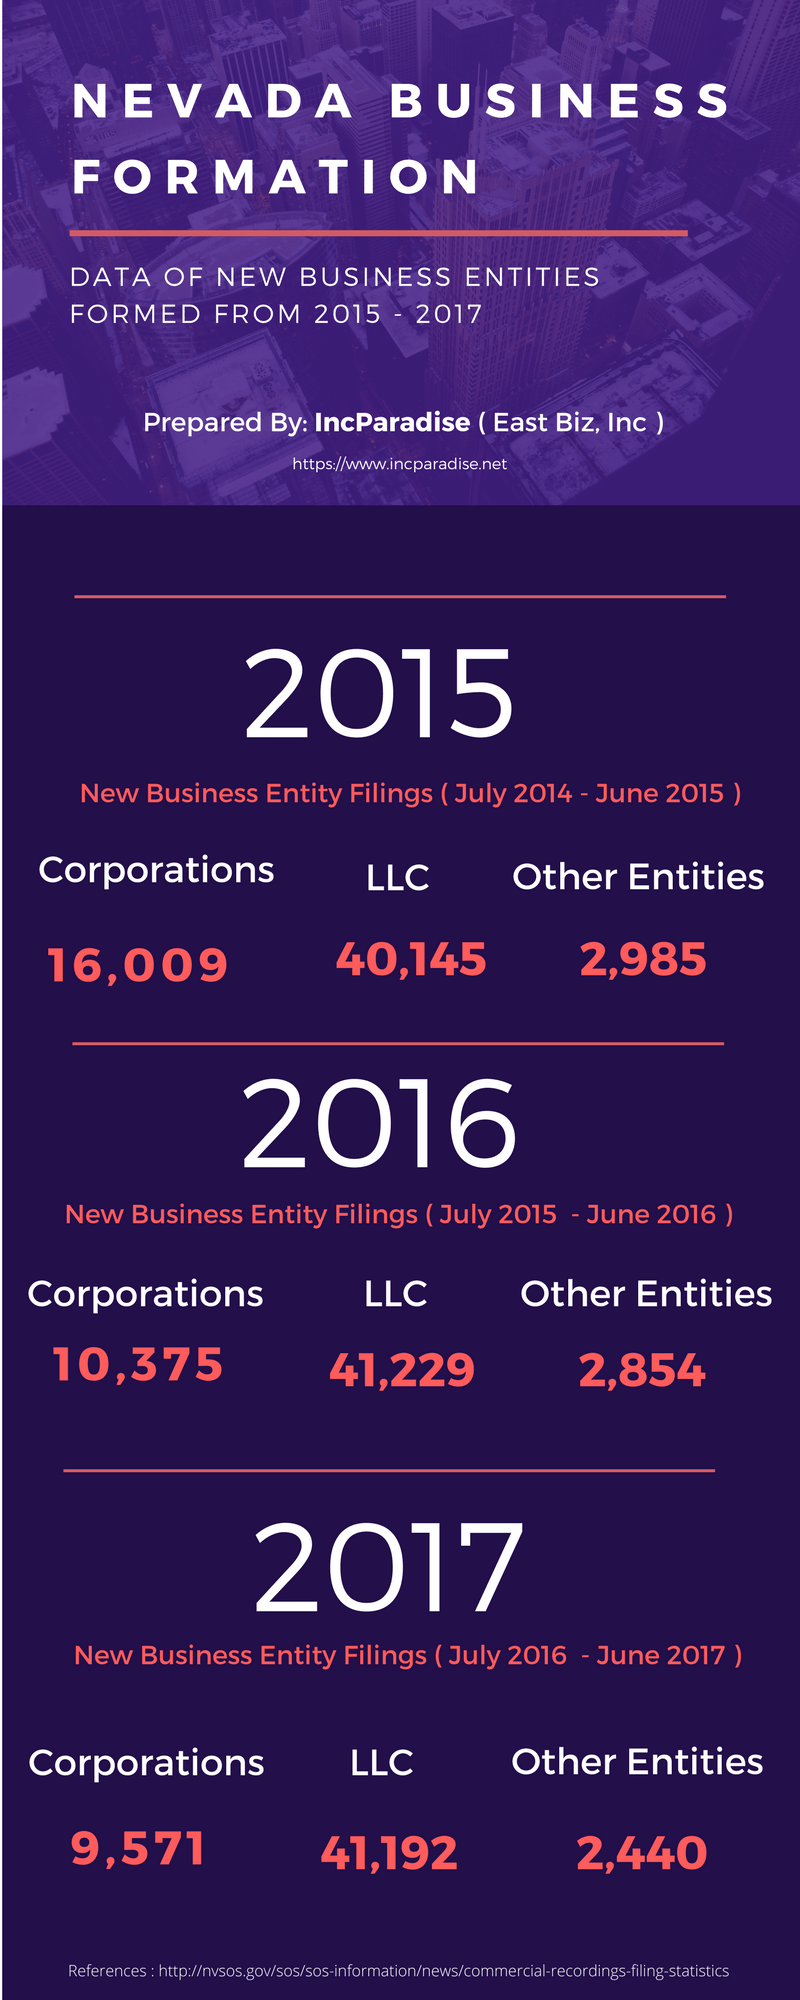 Nevada Business Formation Statistics From 2015 - 2017